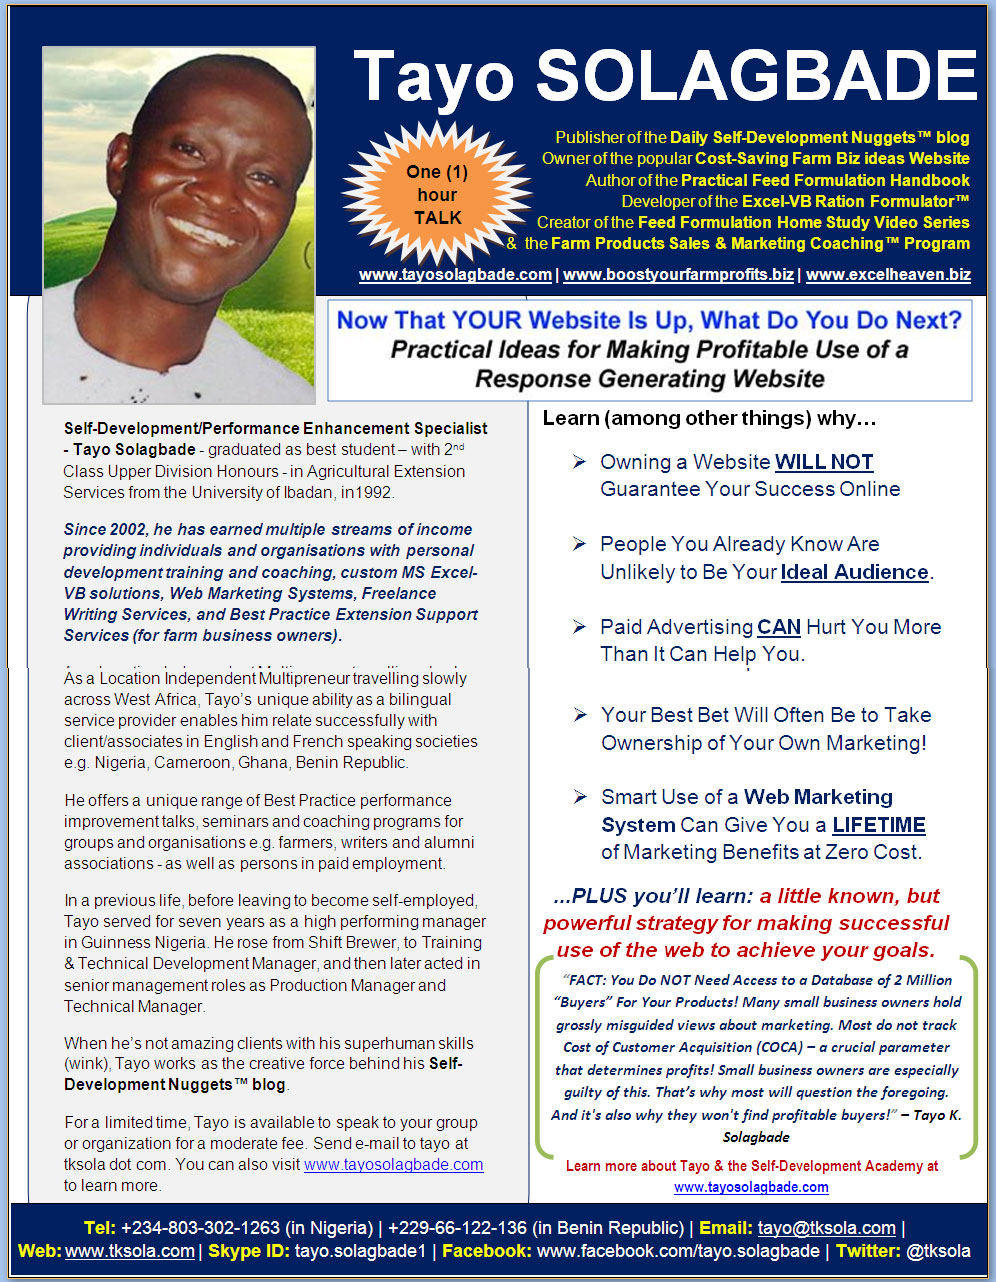 On Saturday (28th June 2014), I'll be delivering this paid 1 hour talk to members of the Media Unit of an NGO in Ogun state - click to download PDF flyer